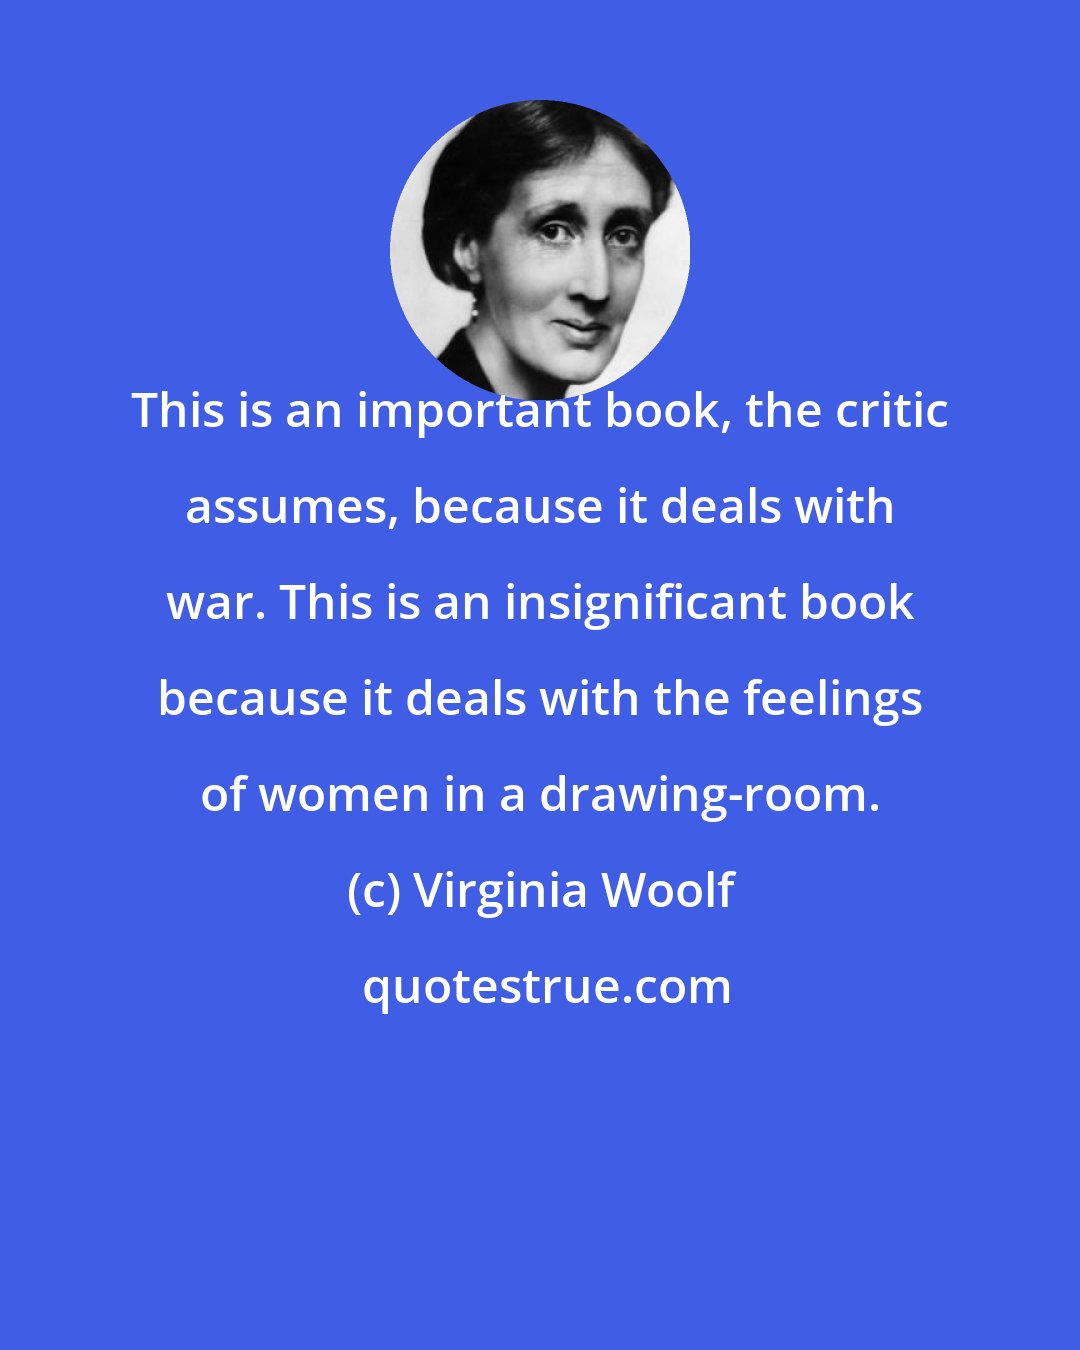 Virginia Woolf: This is an important book, the critic assumes, because it deals with war. This is an insignificant book because it deals with the feelings of women in a drawing-room.